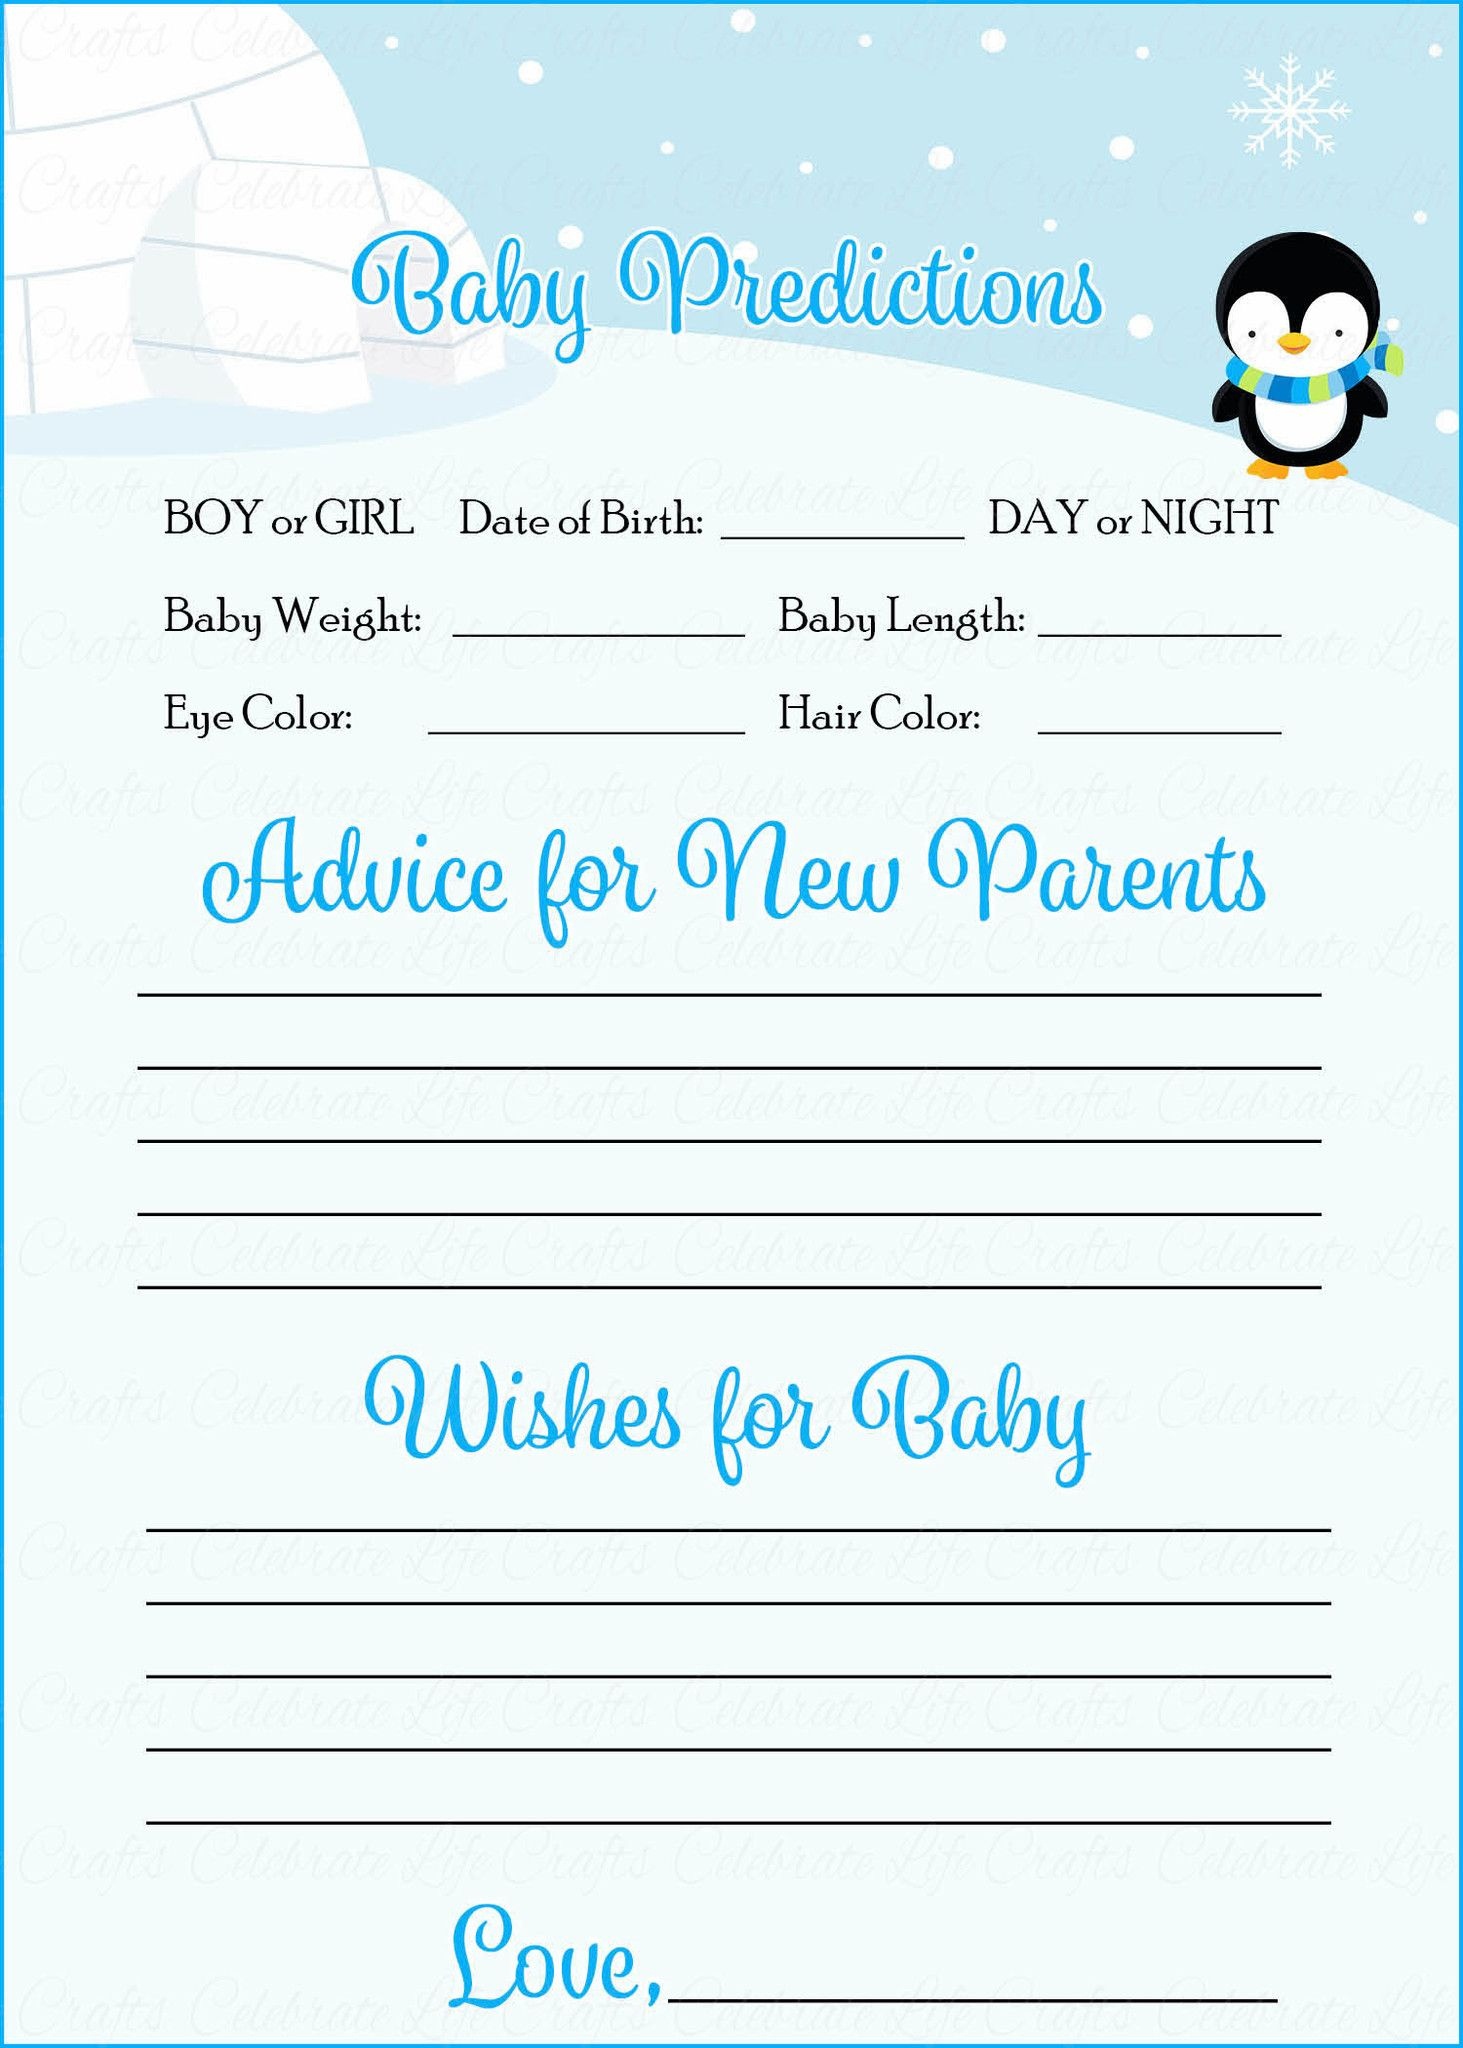 Prediction &amp;amp; Advice Cards - Printable Download - Blue Penguin Winter - Baby Prediction And Advice Cards Free Printable